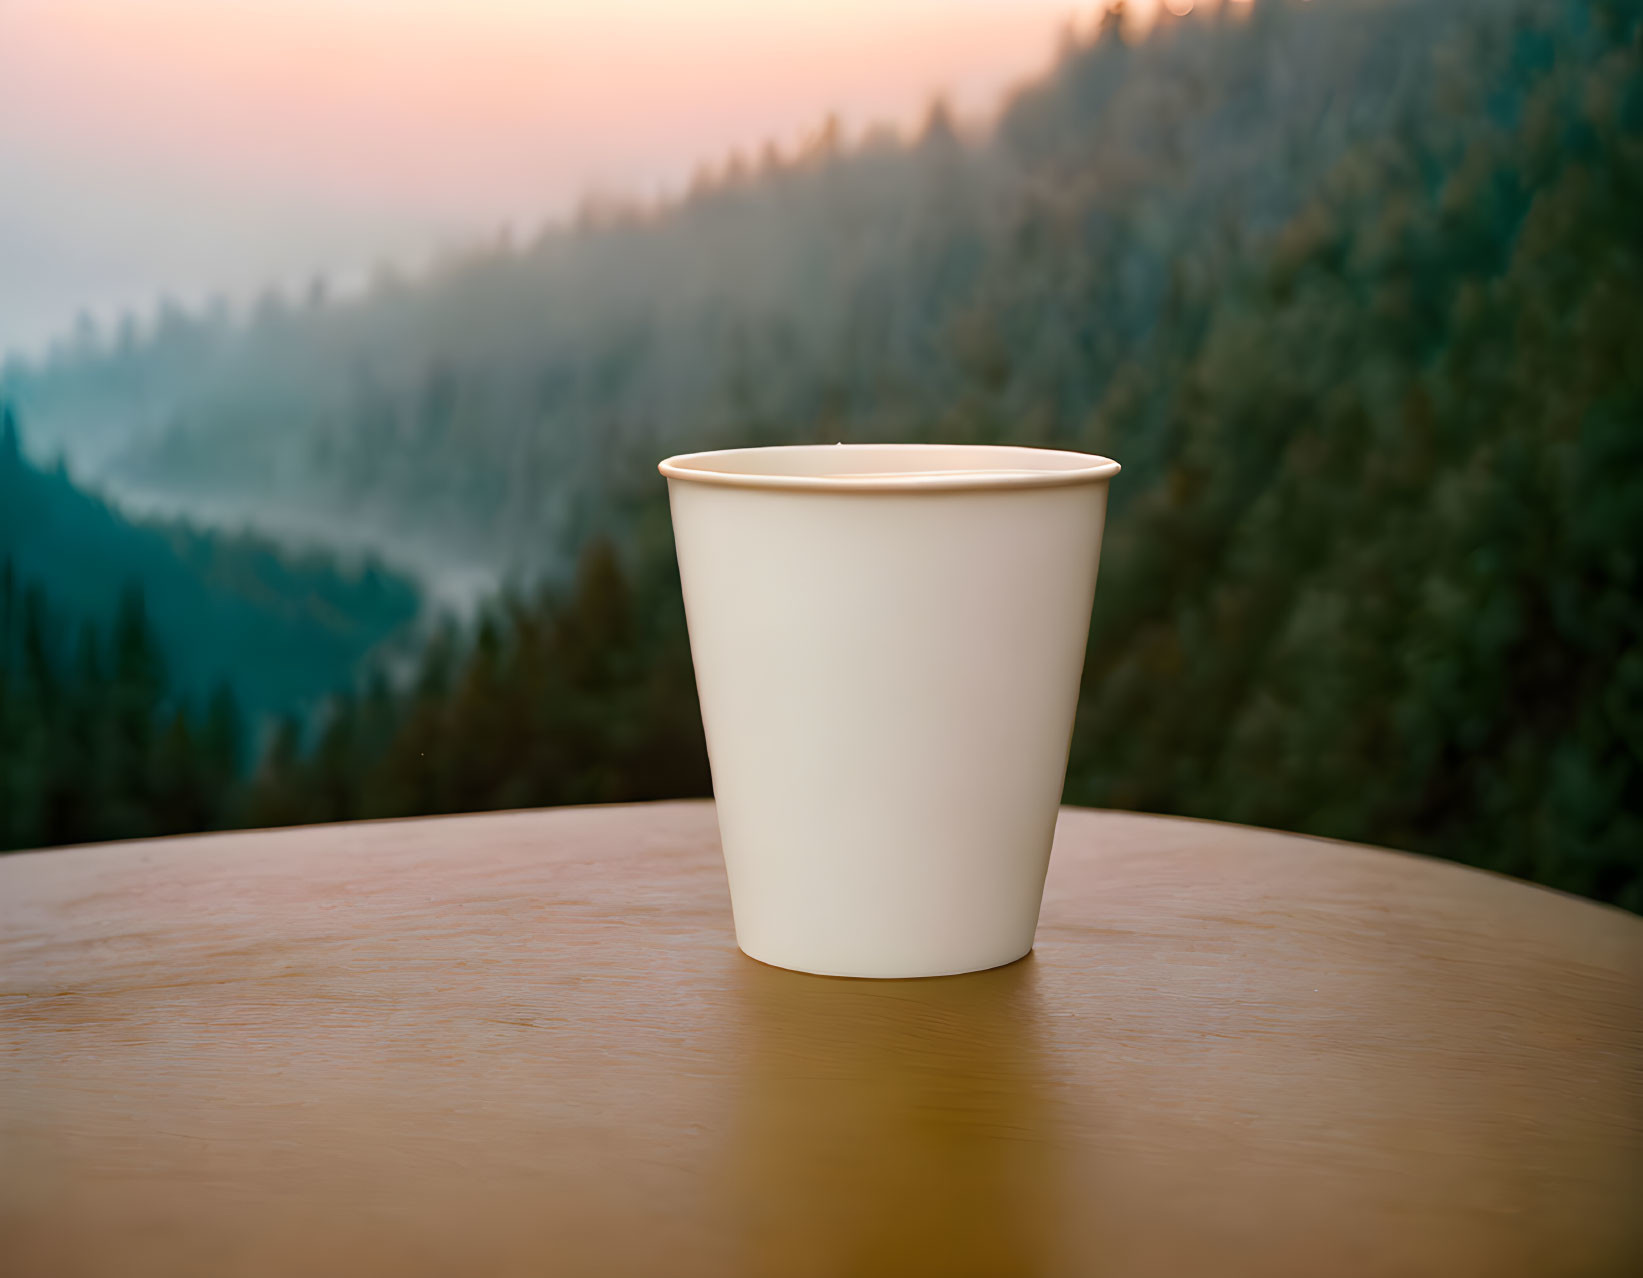 A nice coffee with nature